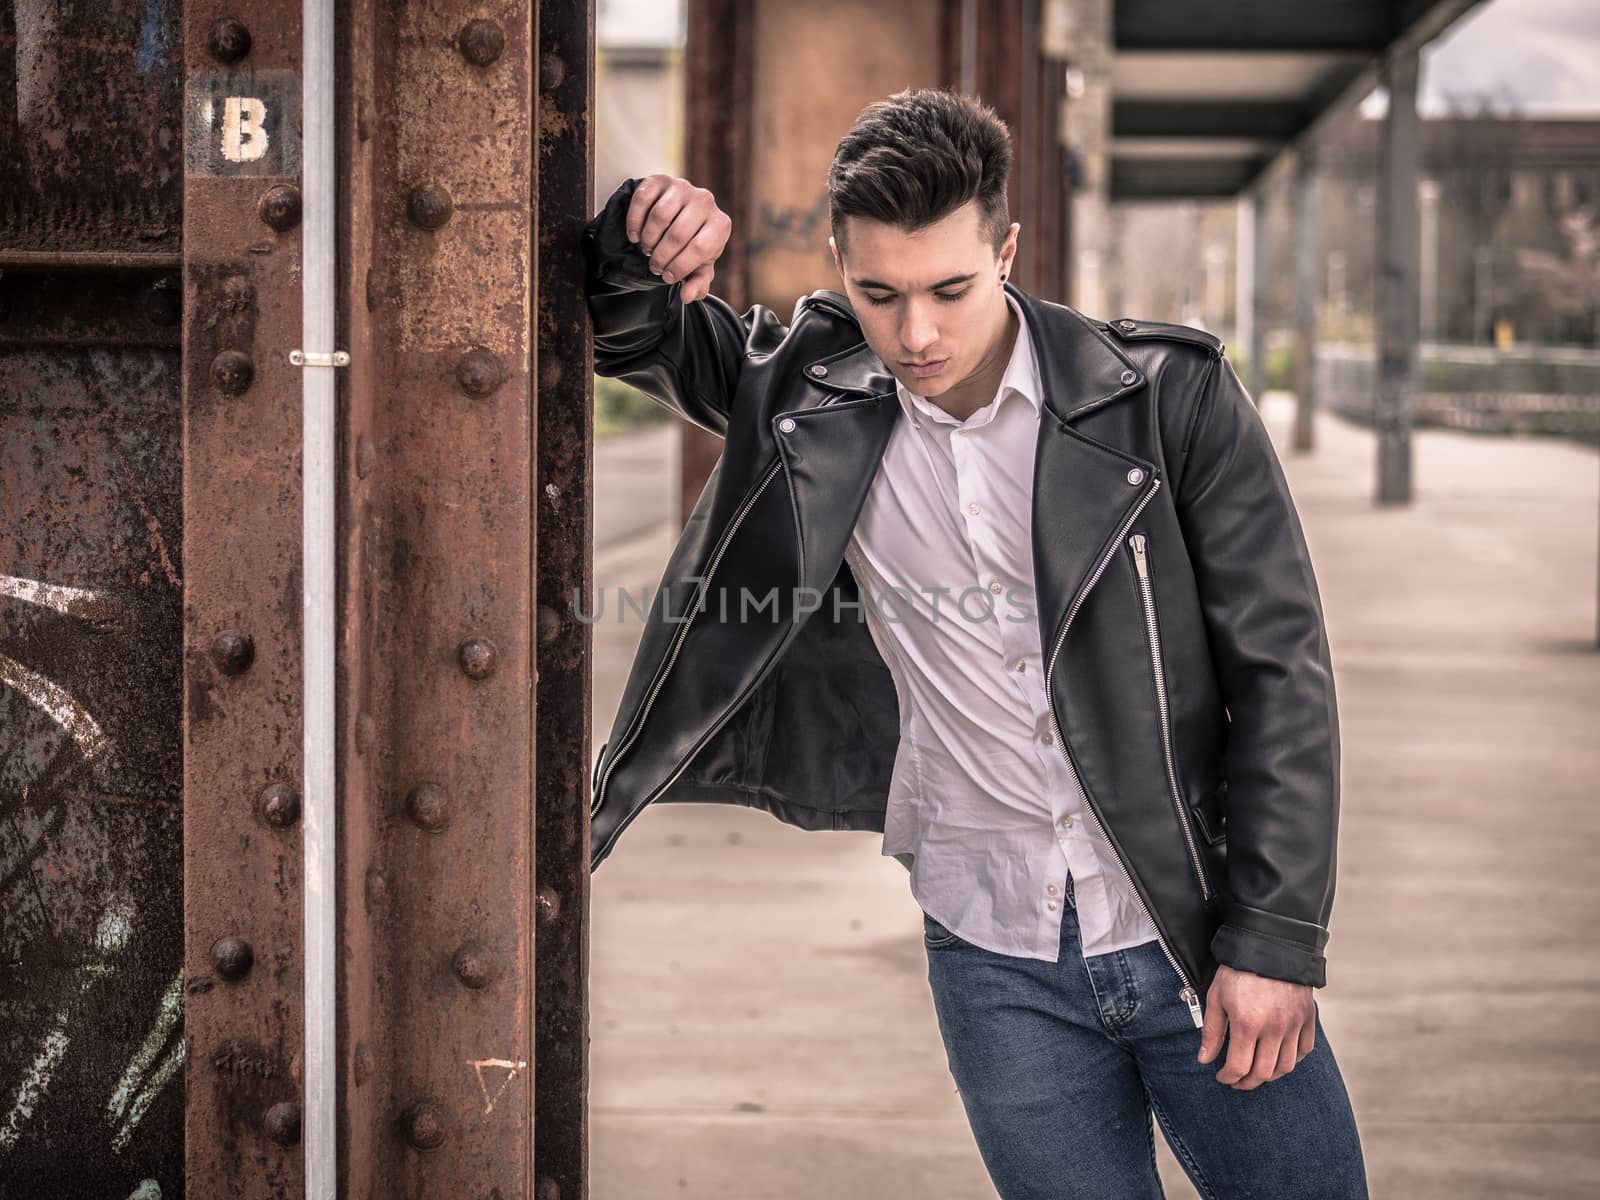 One handsome young man in urban setting in European city, standing, wearing black leather jacket and jeans